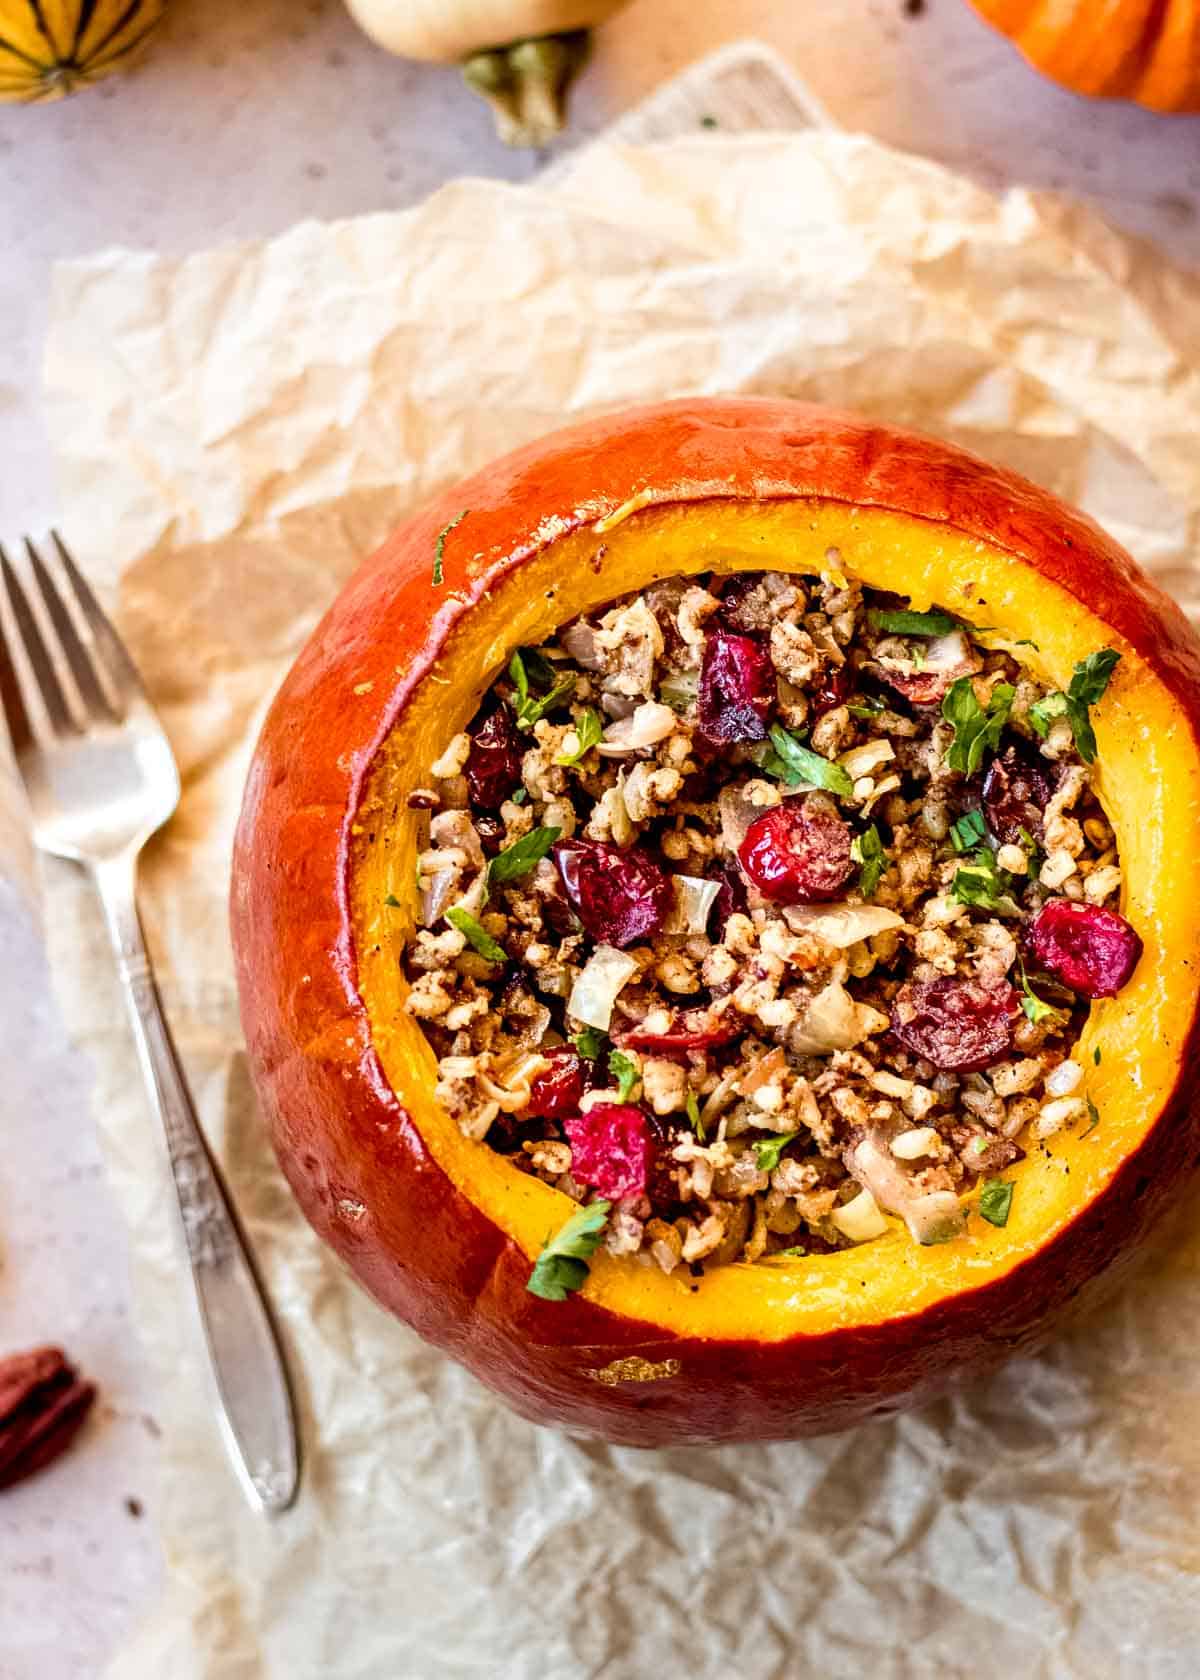 Vegan stuffed pumpkin with rice, pecans and cranberry filling sits on parchment paper, with small decorated squash and fork in background.